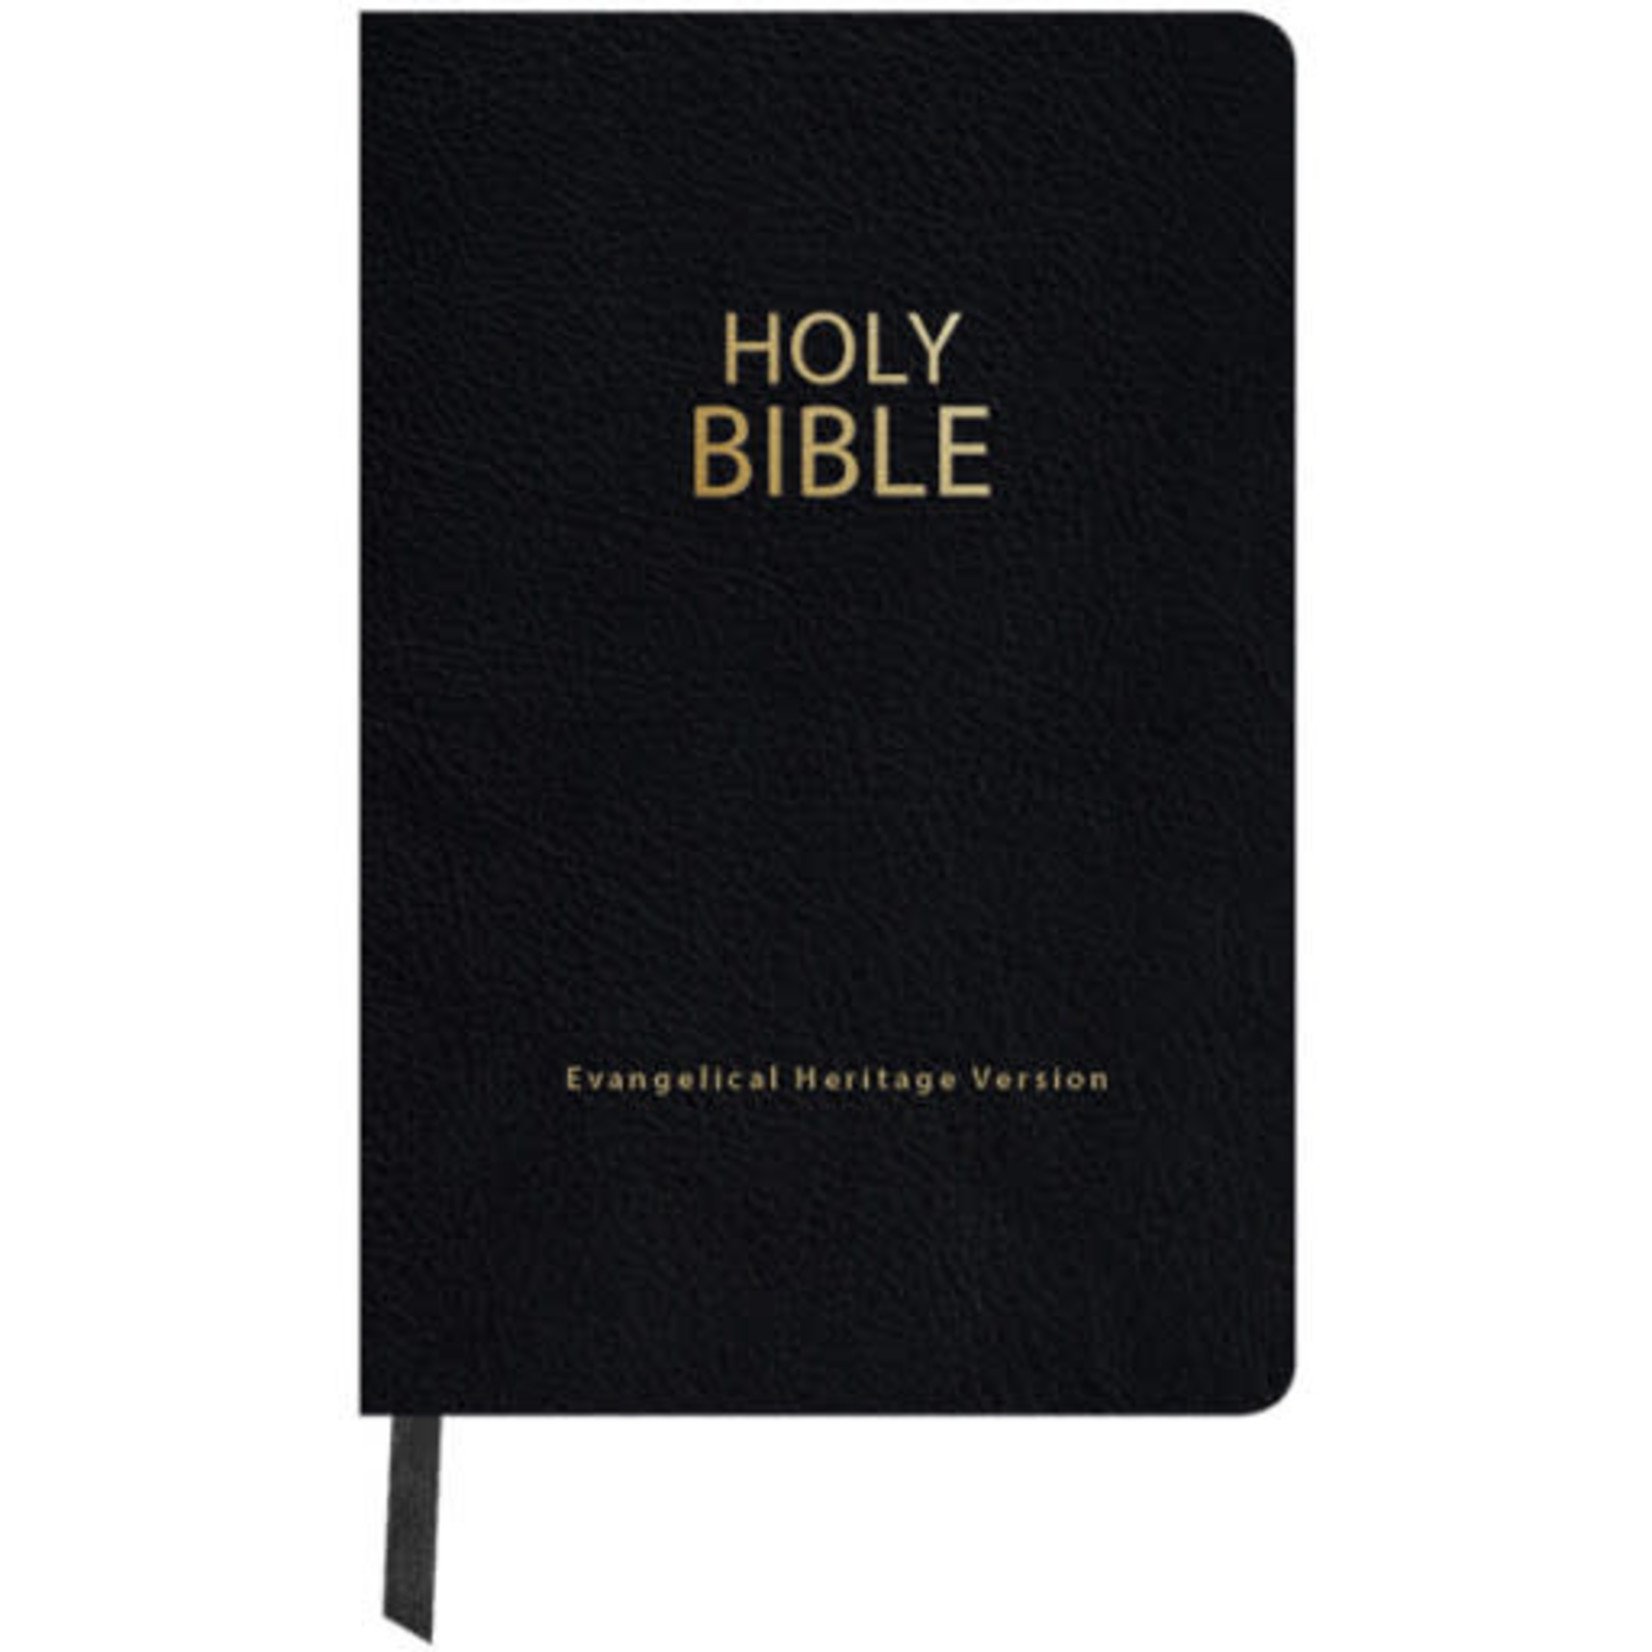 Holy Bible (EHV) Evangelical Heritage Version Deluxe Edition